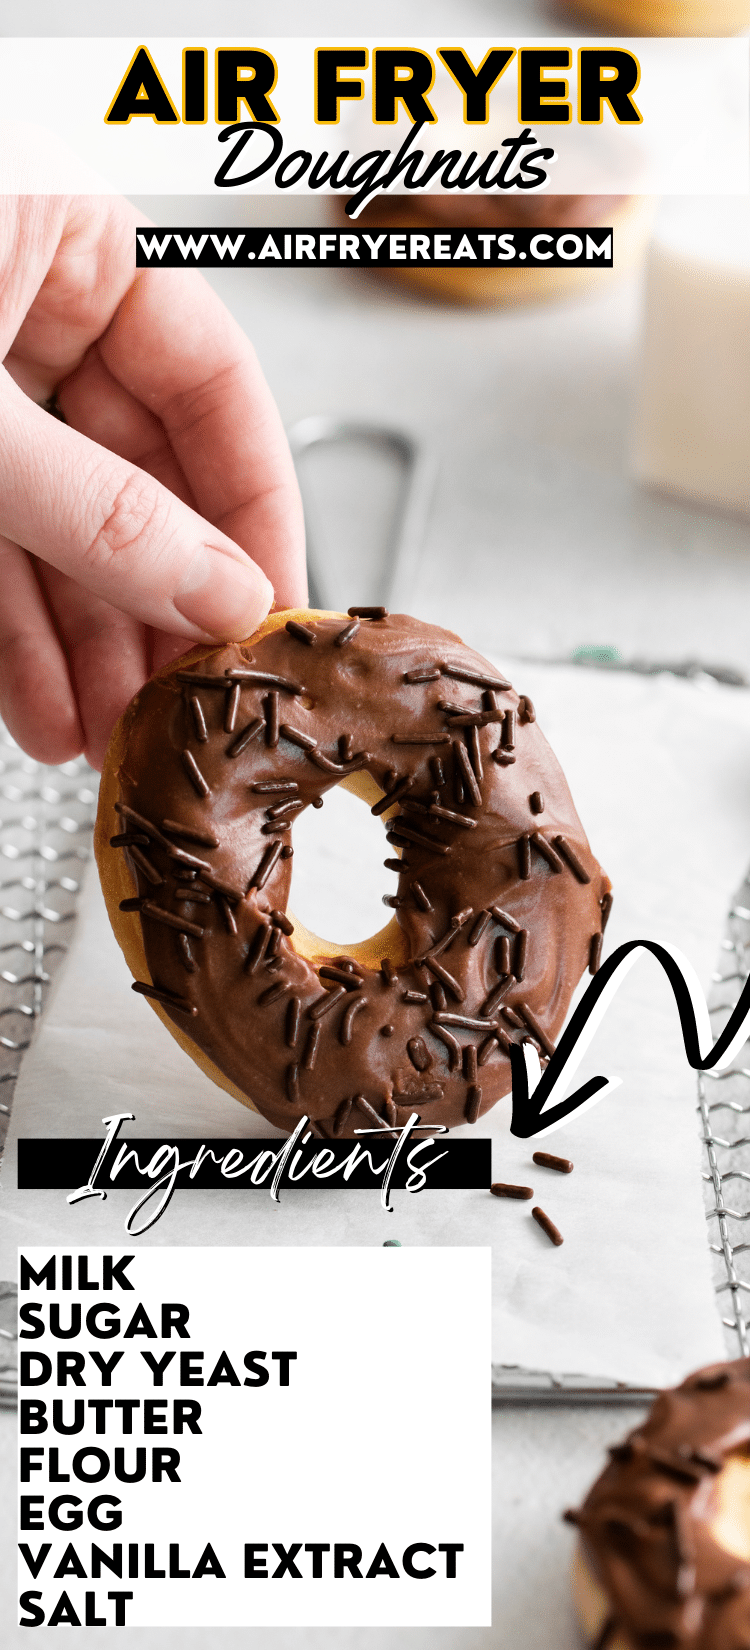 Air Fryer Doughnuts are fluffy and tender, and completely homemade. This simple recipe uses a yeasted dough that tastes exactly like your favorite traditional doughnut. Top them with a creamy chocolate frosting or dip them in cinnamon and sugar for extra decadence. via @vegetarianmamma